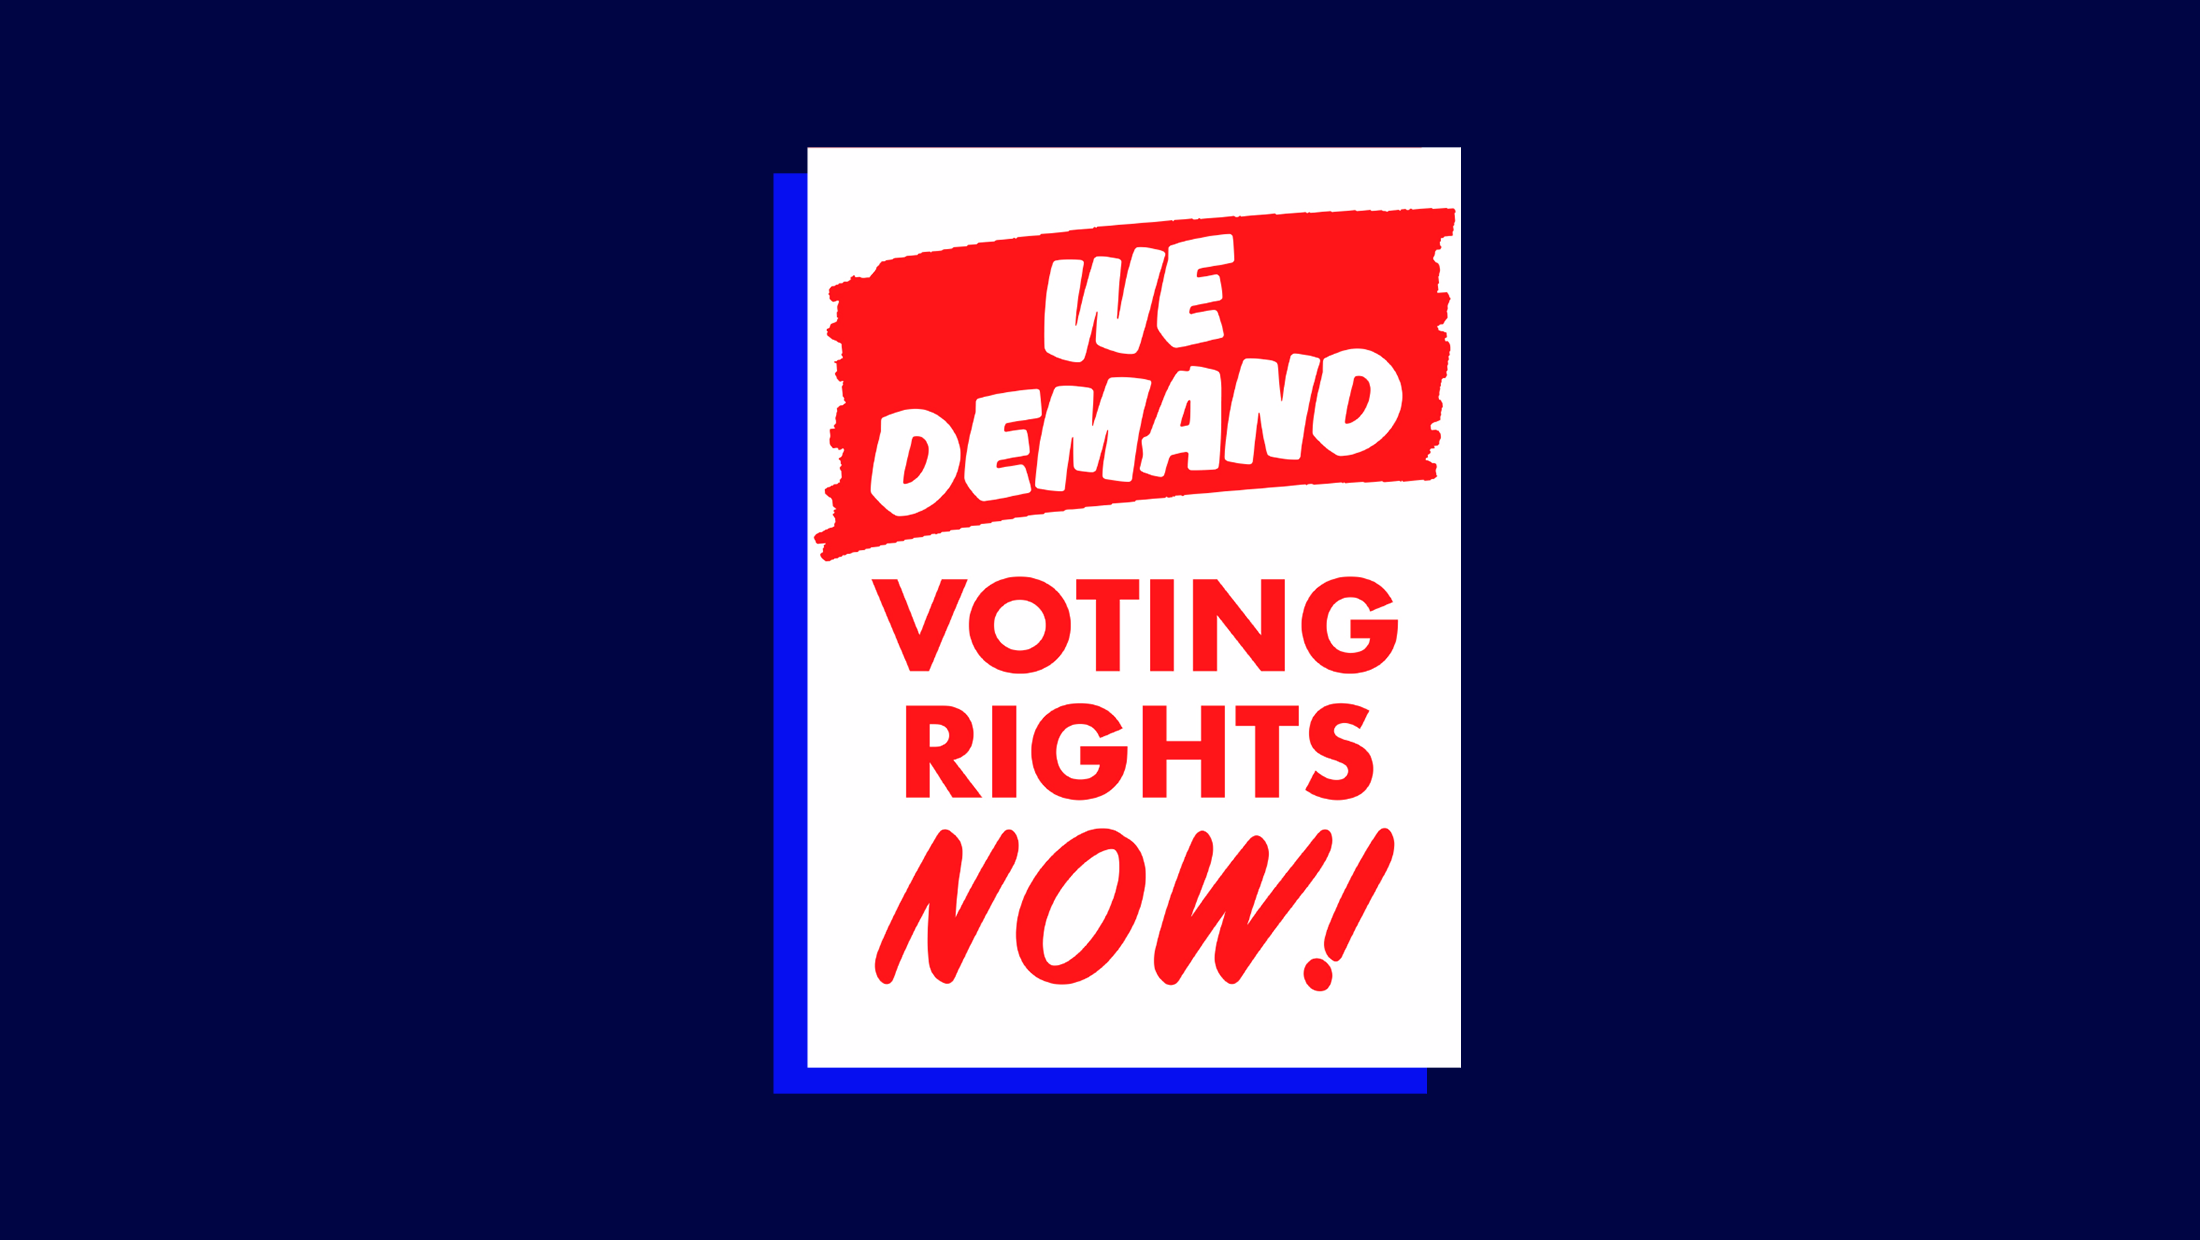 A protest sign that says "WE DEMAND VOTING RIGHTS NOW!"